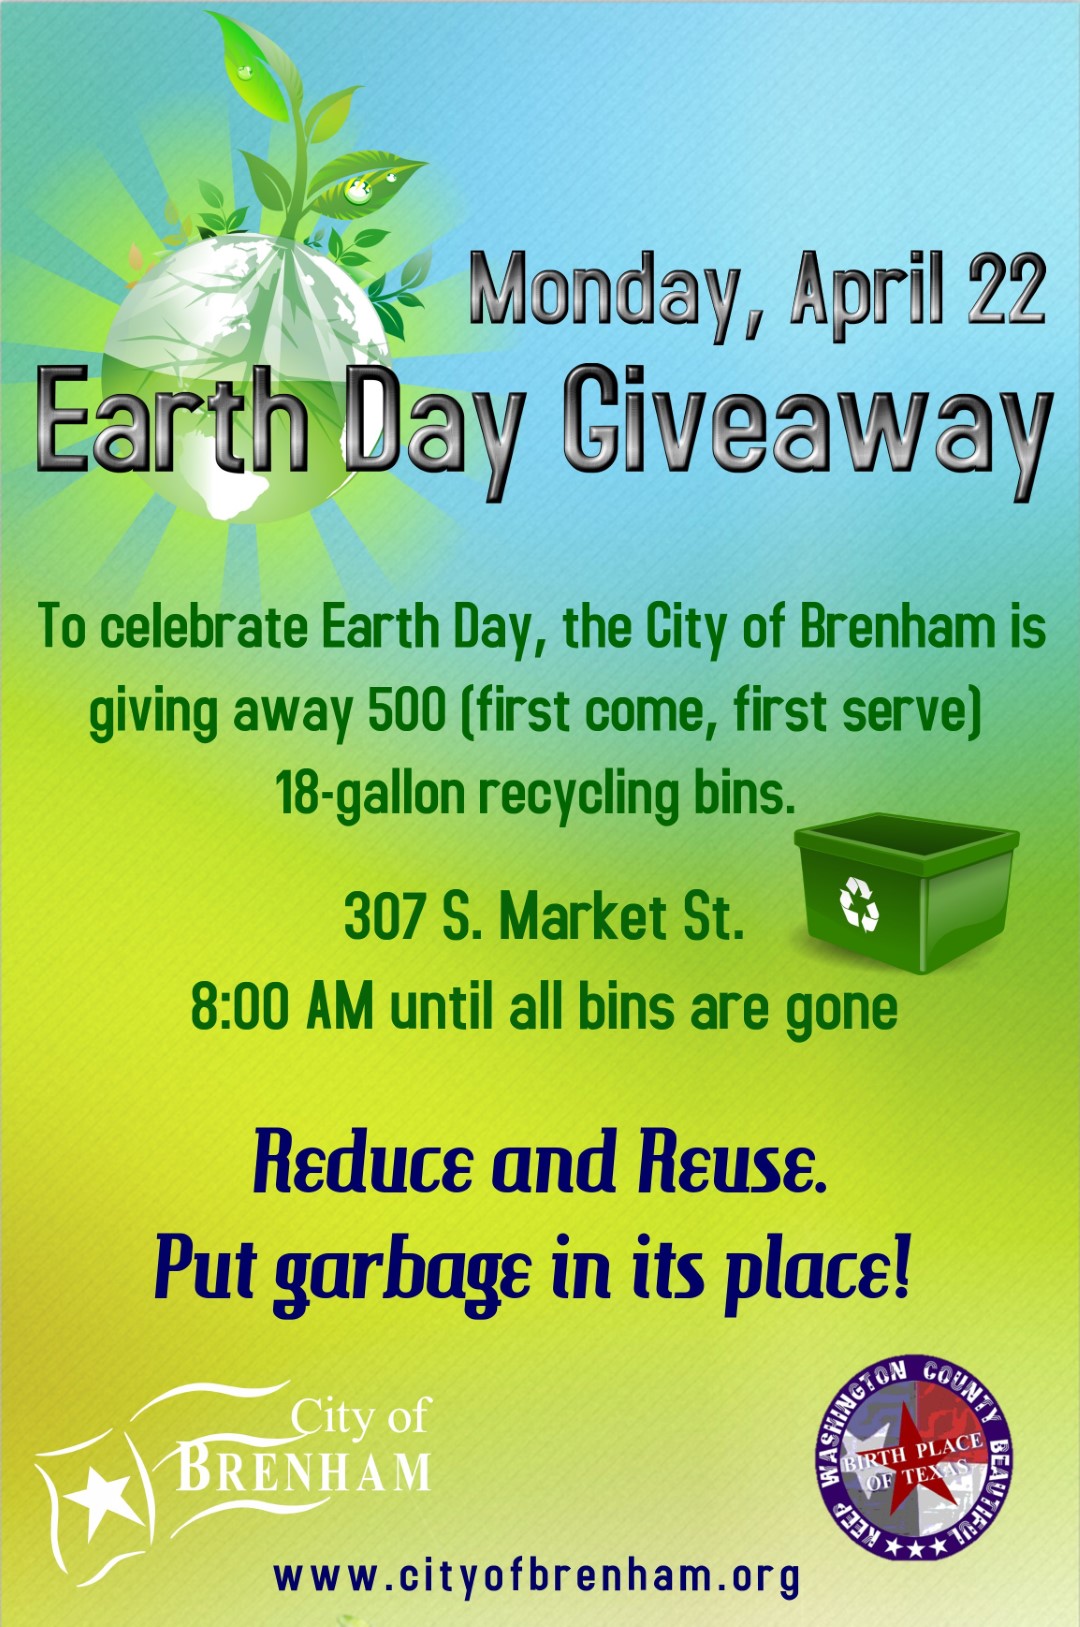 April 22, 2019 - at the City of Brenham Recycling Center To celebrate Earth Day, the City of Brenham is giving away 500 (first come, first serve) 18-gallon recycling bins.  Remember to Reduce and Reuse as well as Recycle. Put garbage in its place!  https://www.cityofbrenham.org/recycle